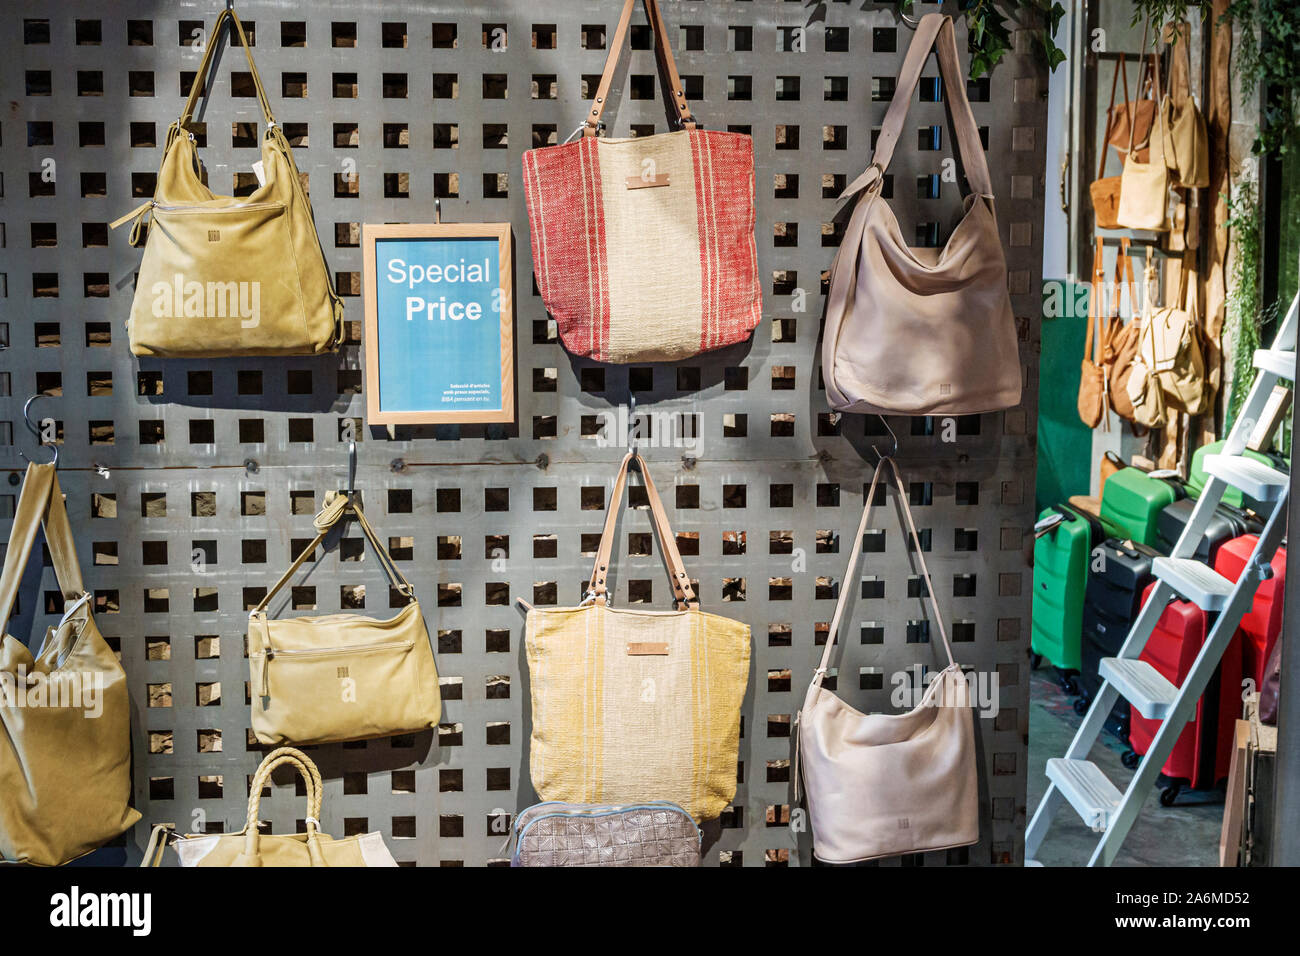 Page 2 - Spain Handbags High Resolution Stock Photography and Images - Alamy